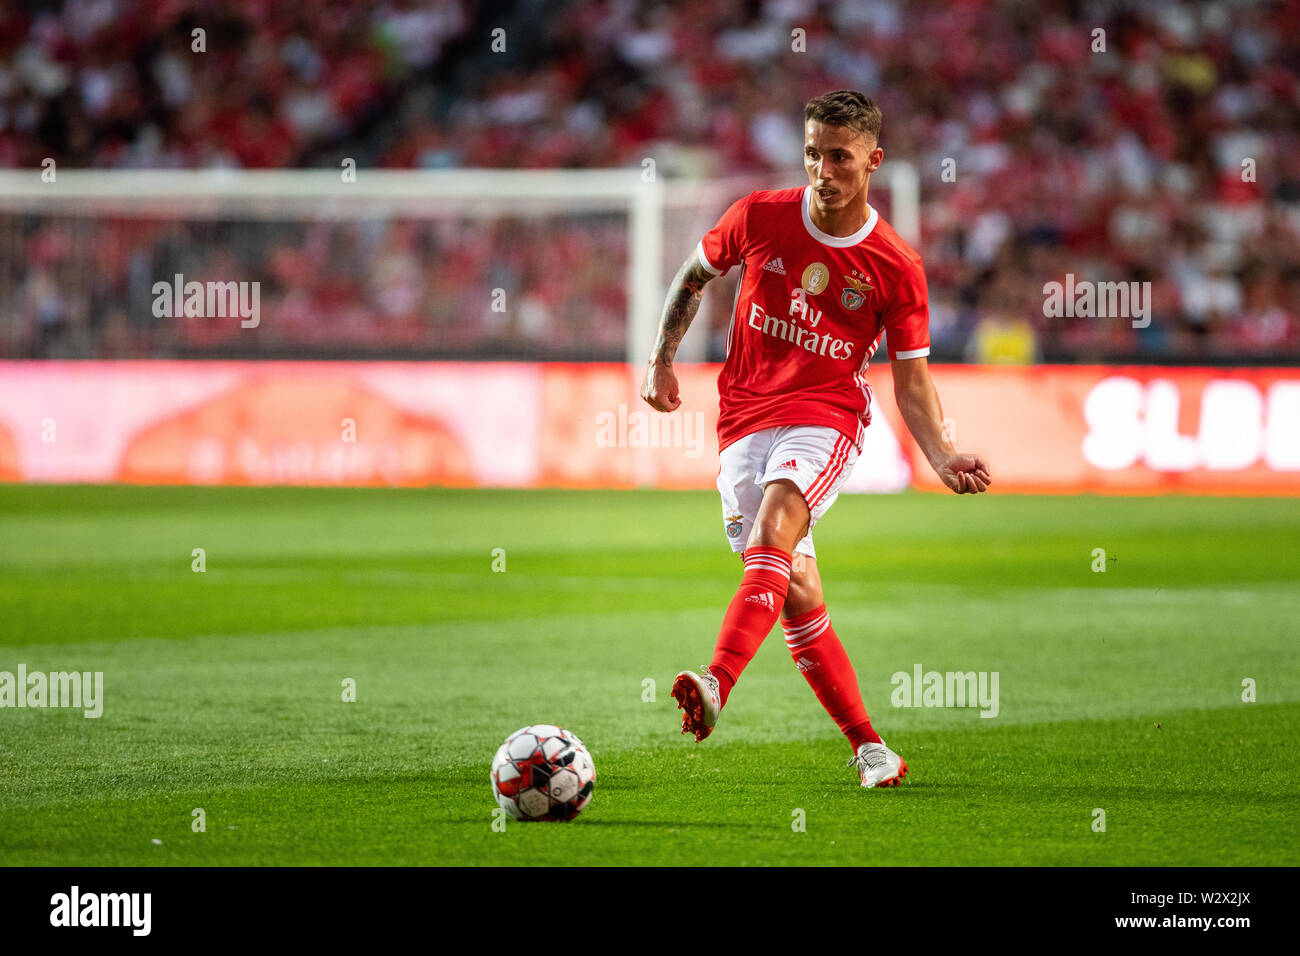 Lisbon, Portugal. 10th July, 2019. Alex Grimaldo of SL Benfica in action during the Pre-Season football match 2019/2020 between SL Benfica vs Royal Sporting Club Anderlecht. (Final score: SL Benfica 1 - 2 Royal Sporting Club Anderlecht) Credit: SOPA Images Limited/Alamy Live News Stock Photo